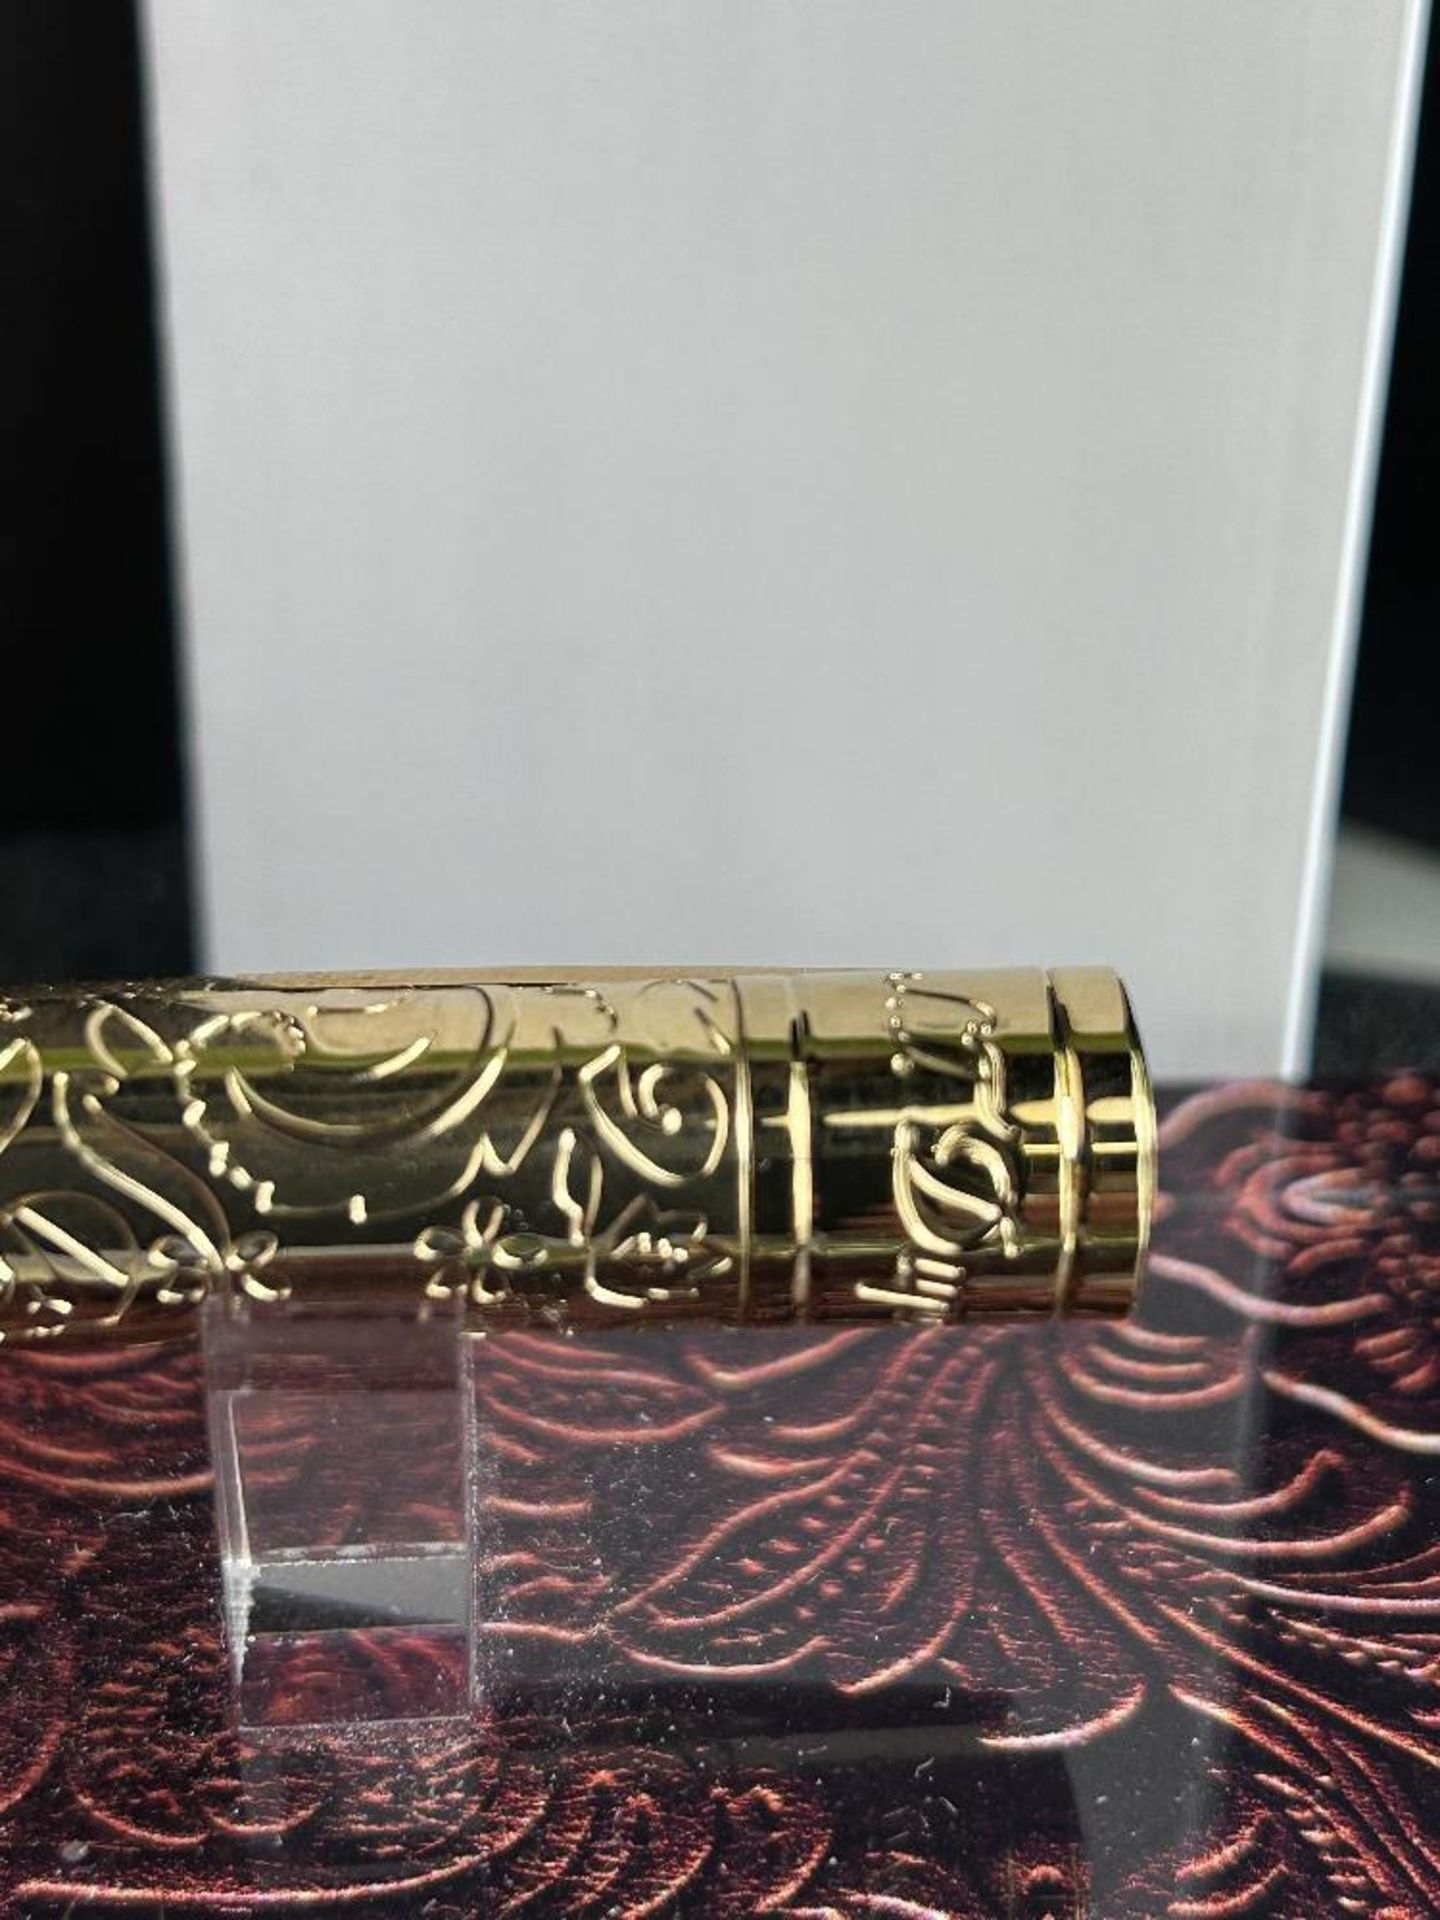 S.T. Dupont Pirates Of The Caribbean Ballpoint Gold Plated Pen - Image 3 of 7